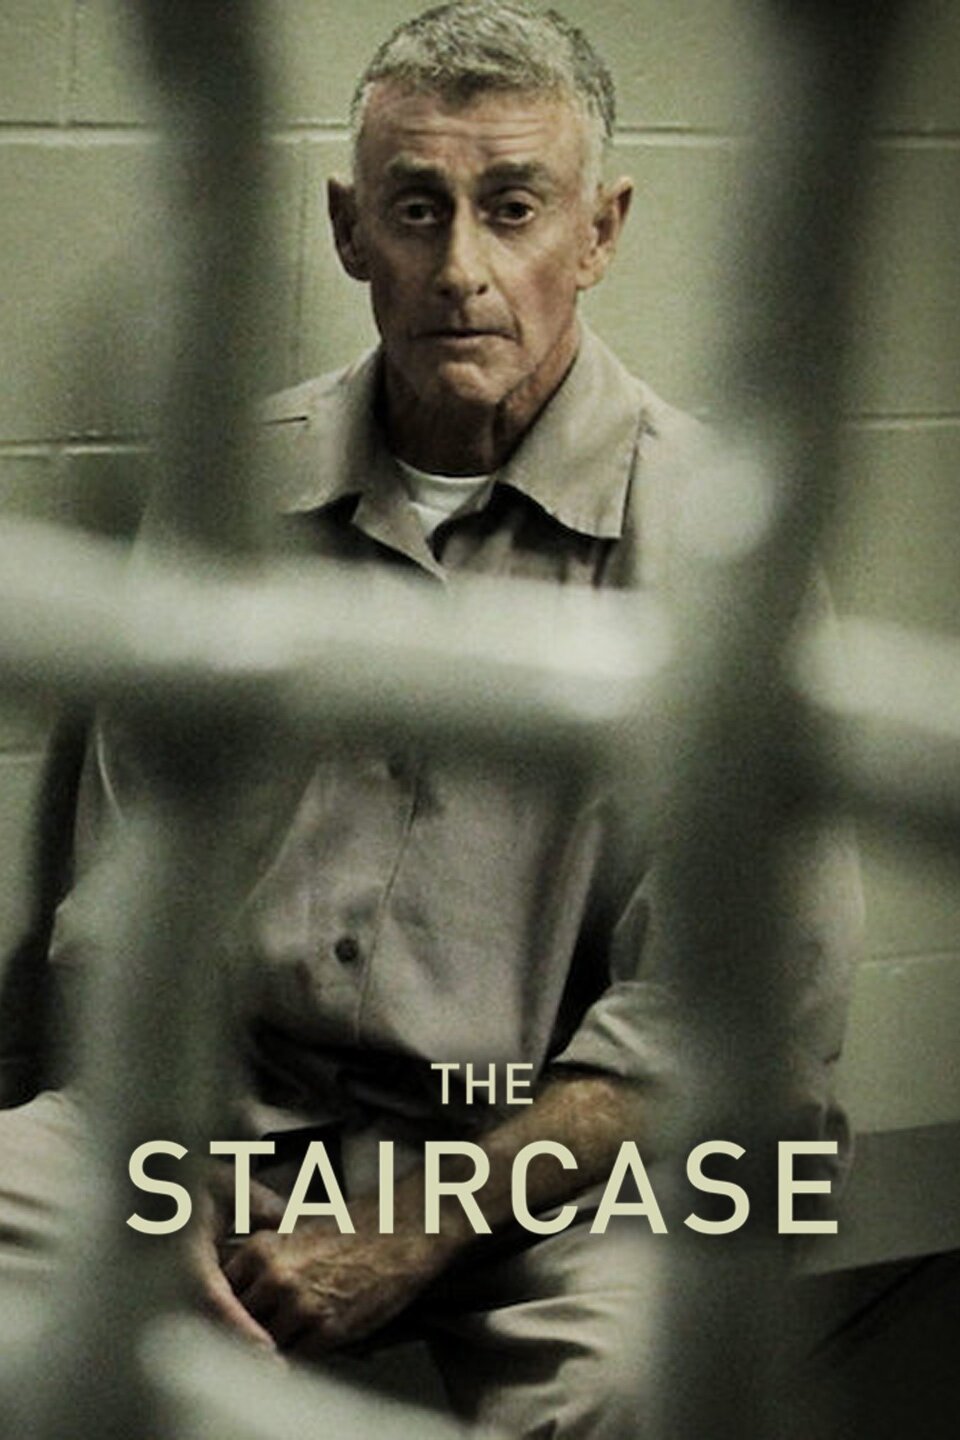 the staircase movie review